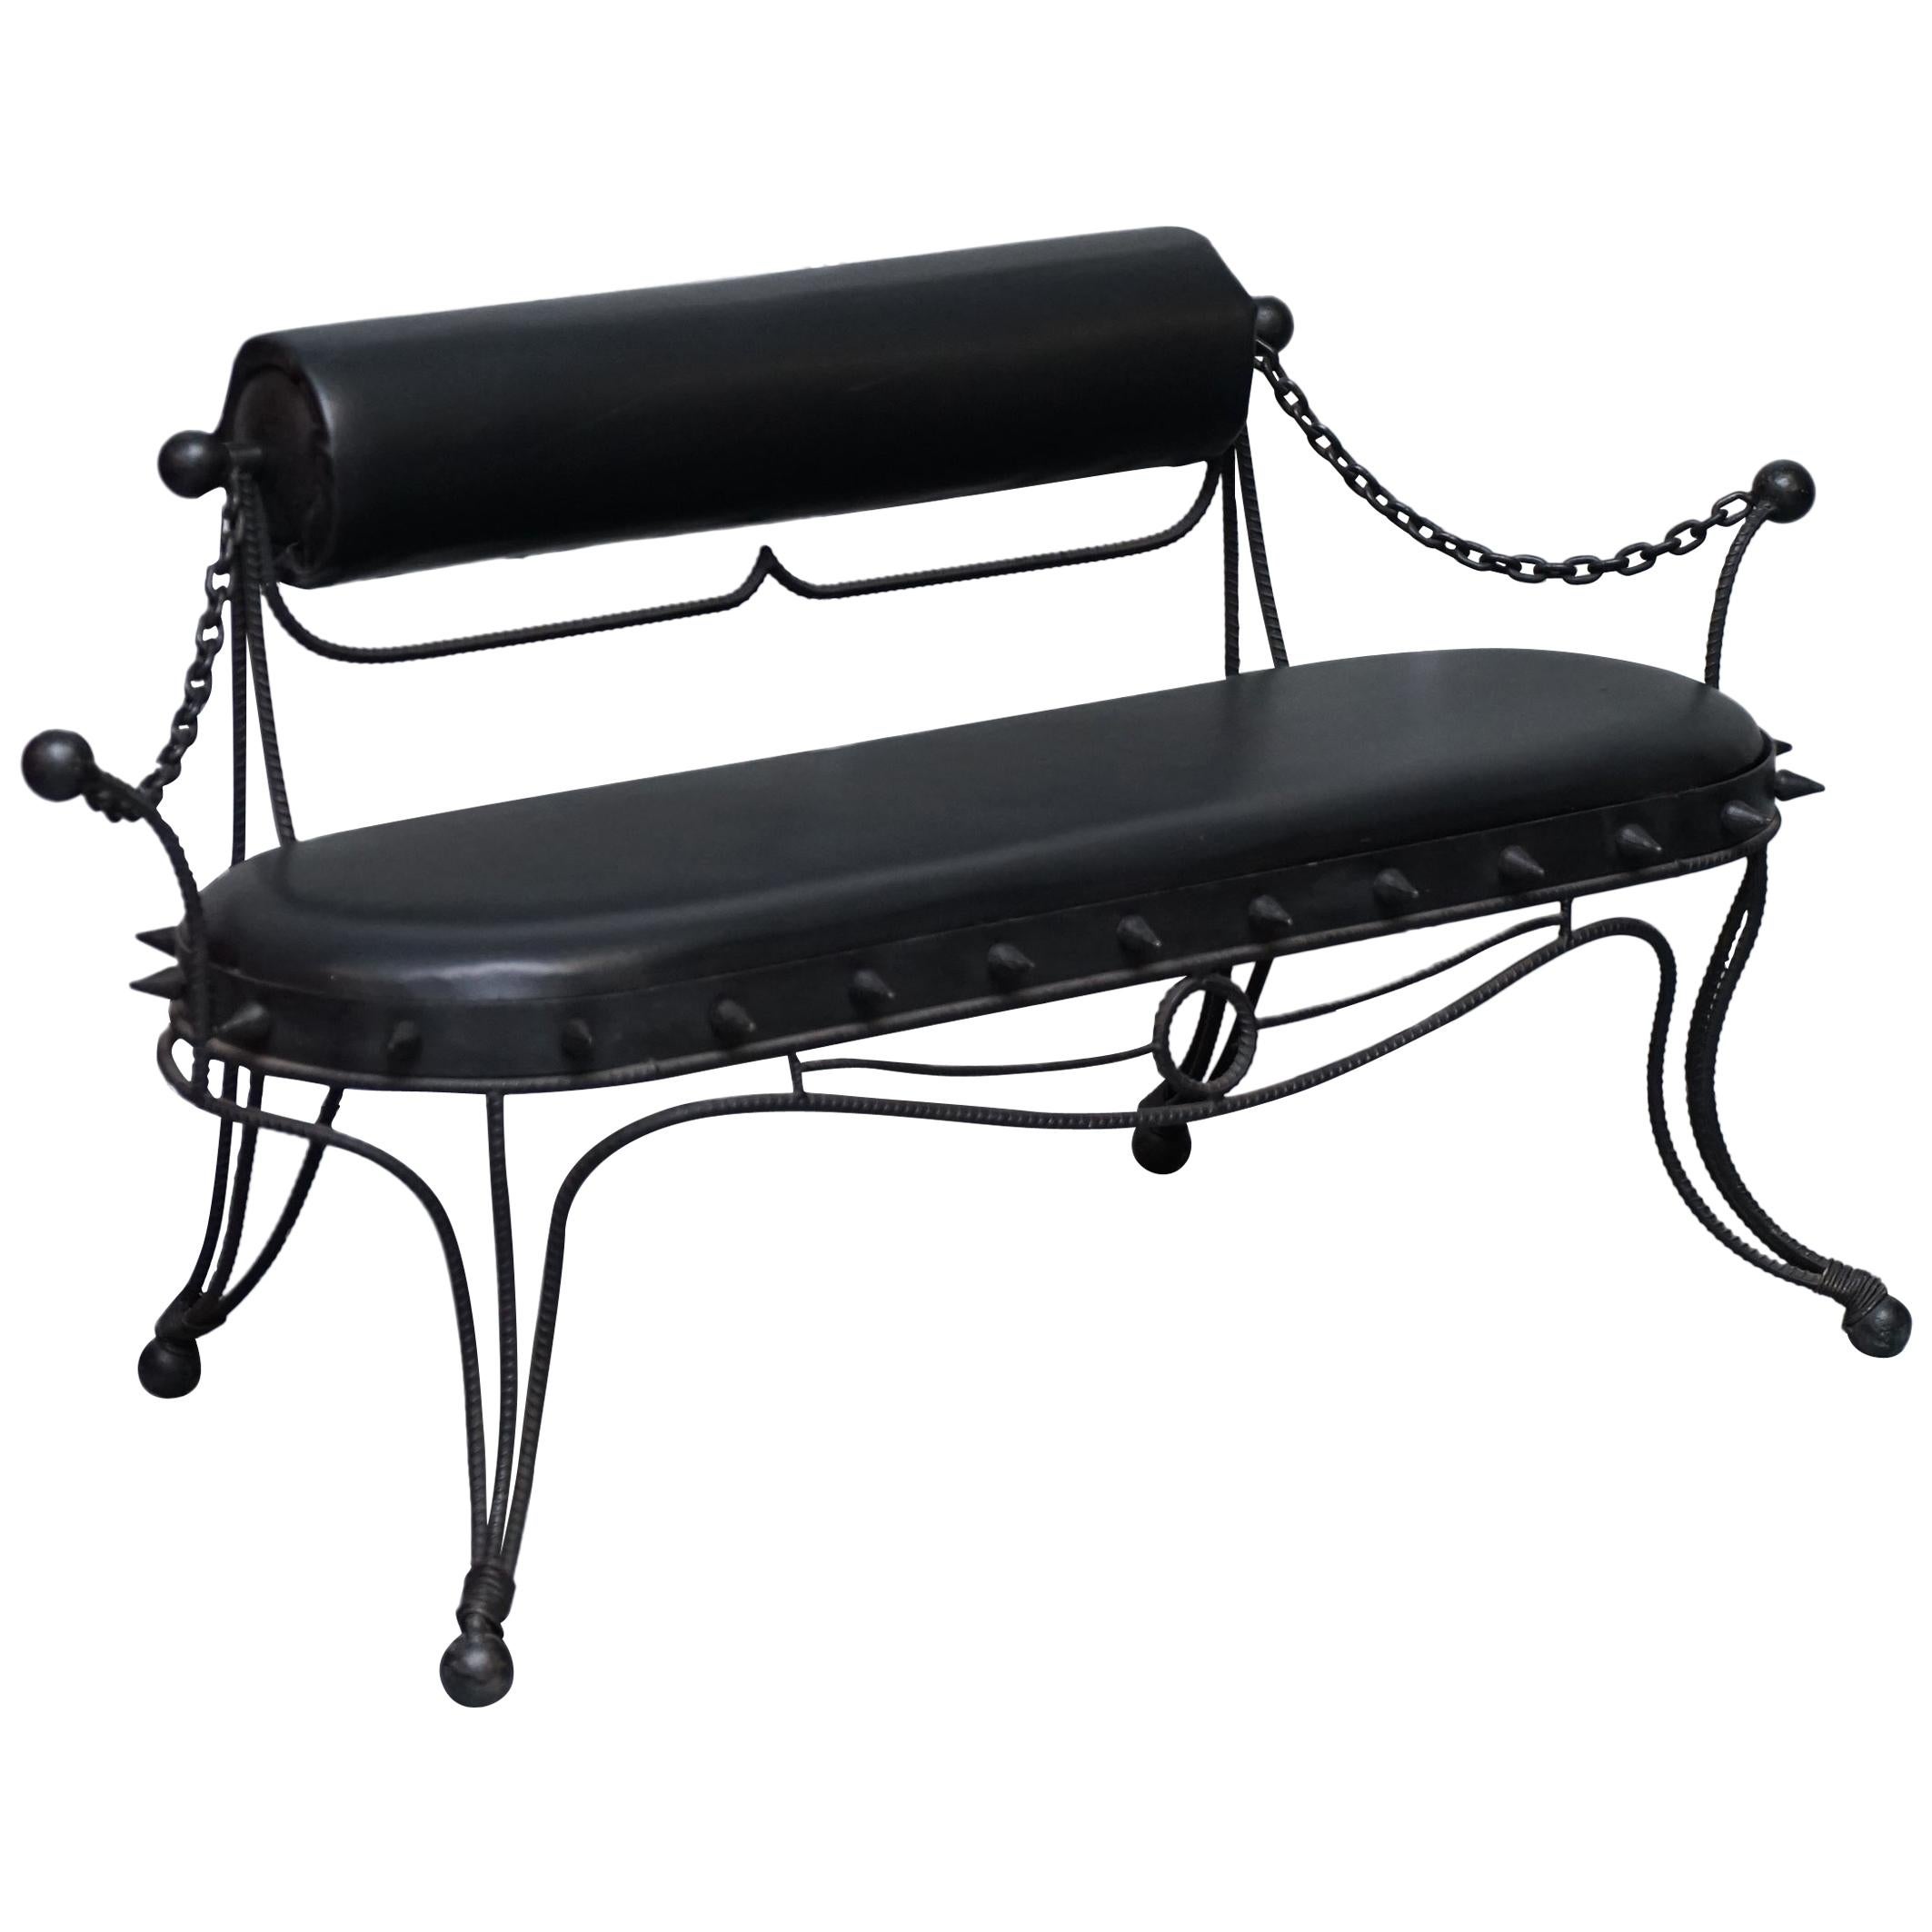 Very Interesting Iron Workers Gothic Sexy Dungeon Wrought Iron Bench Part of Set For Sale